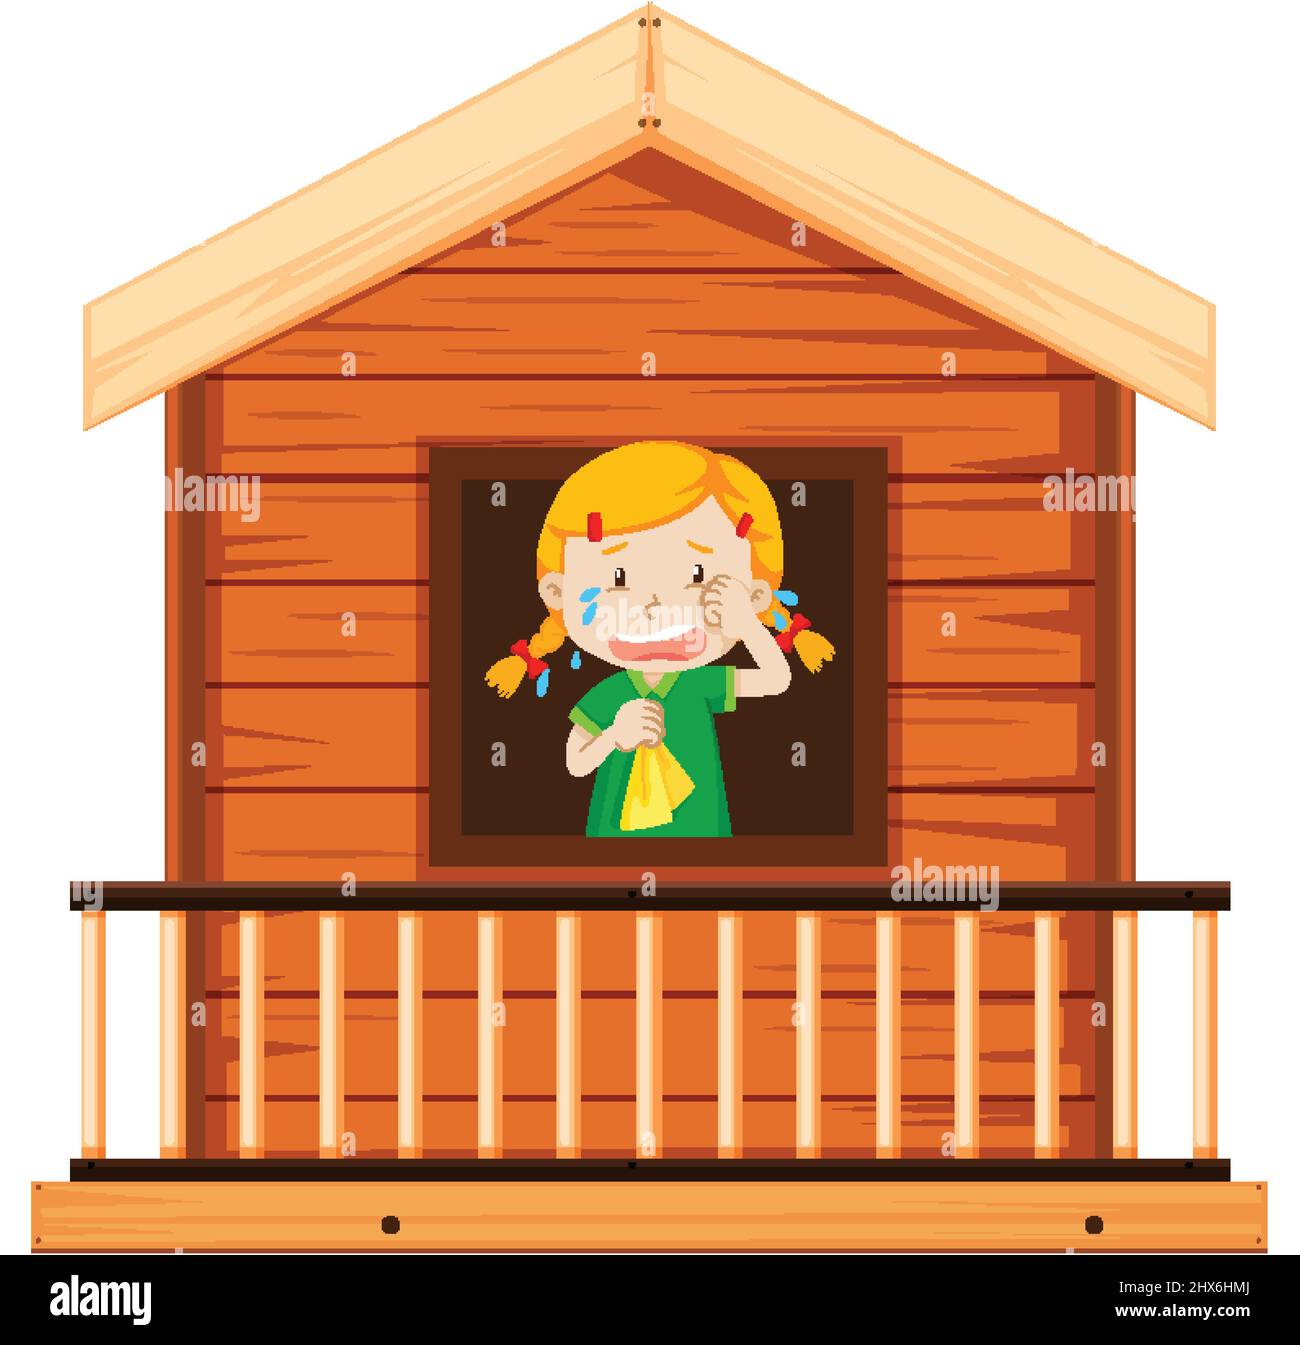 Little girl standing by the window illustration Stock Vector